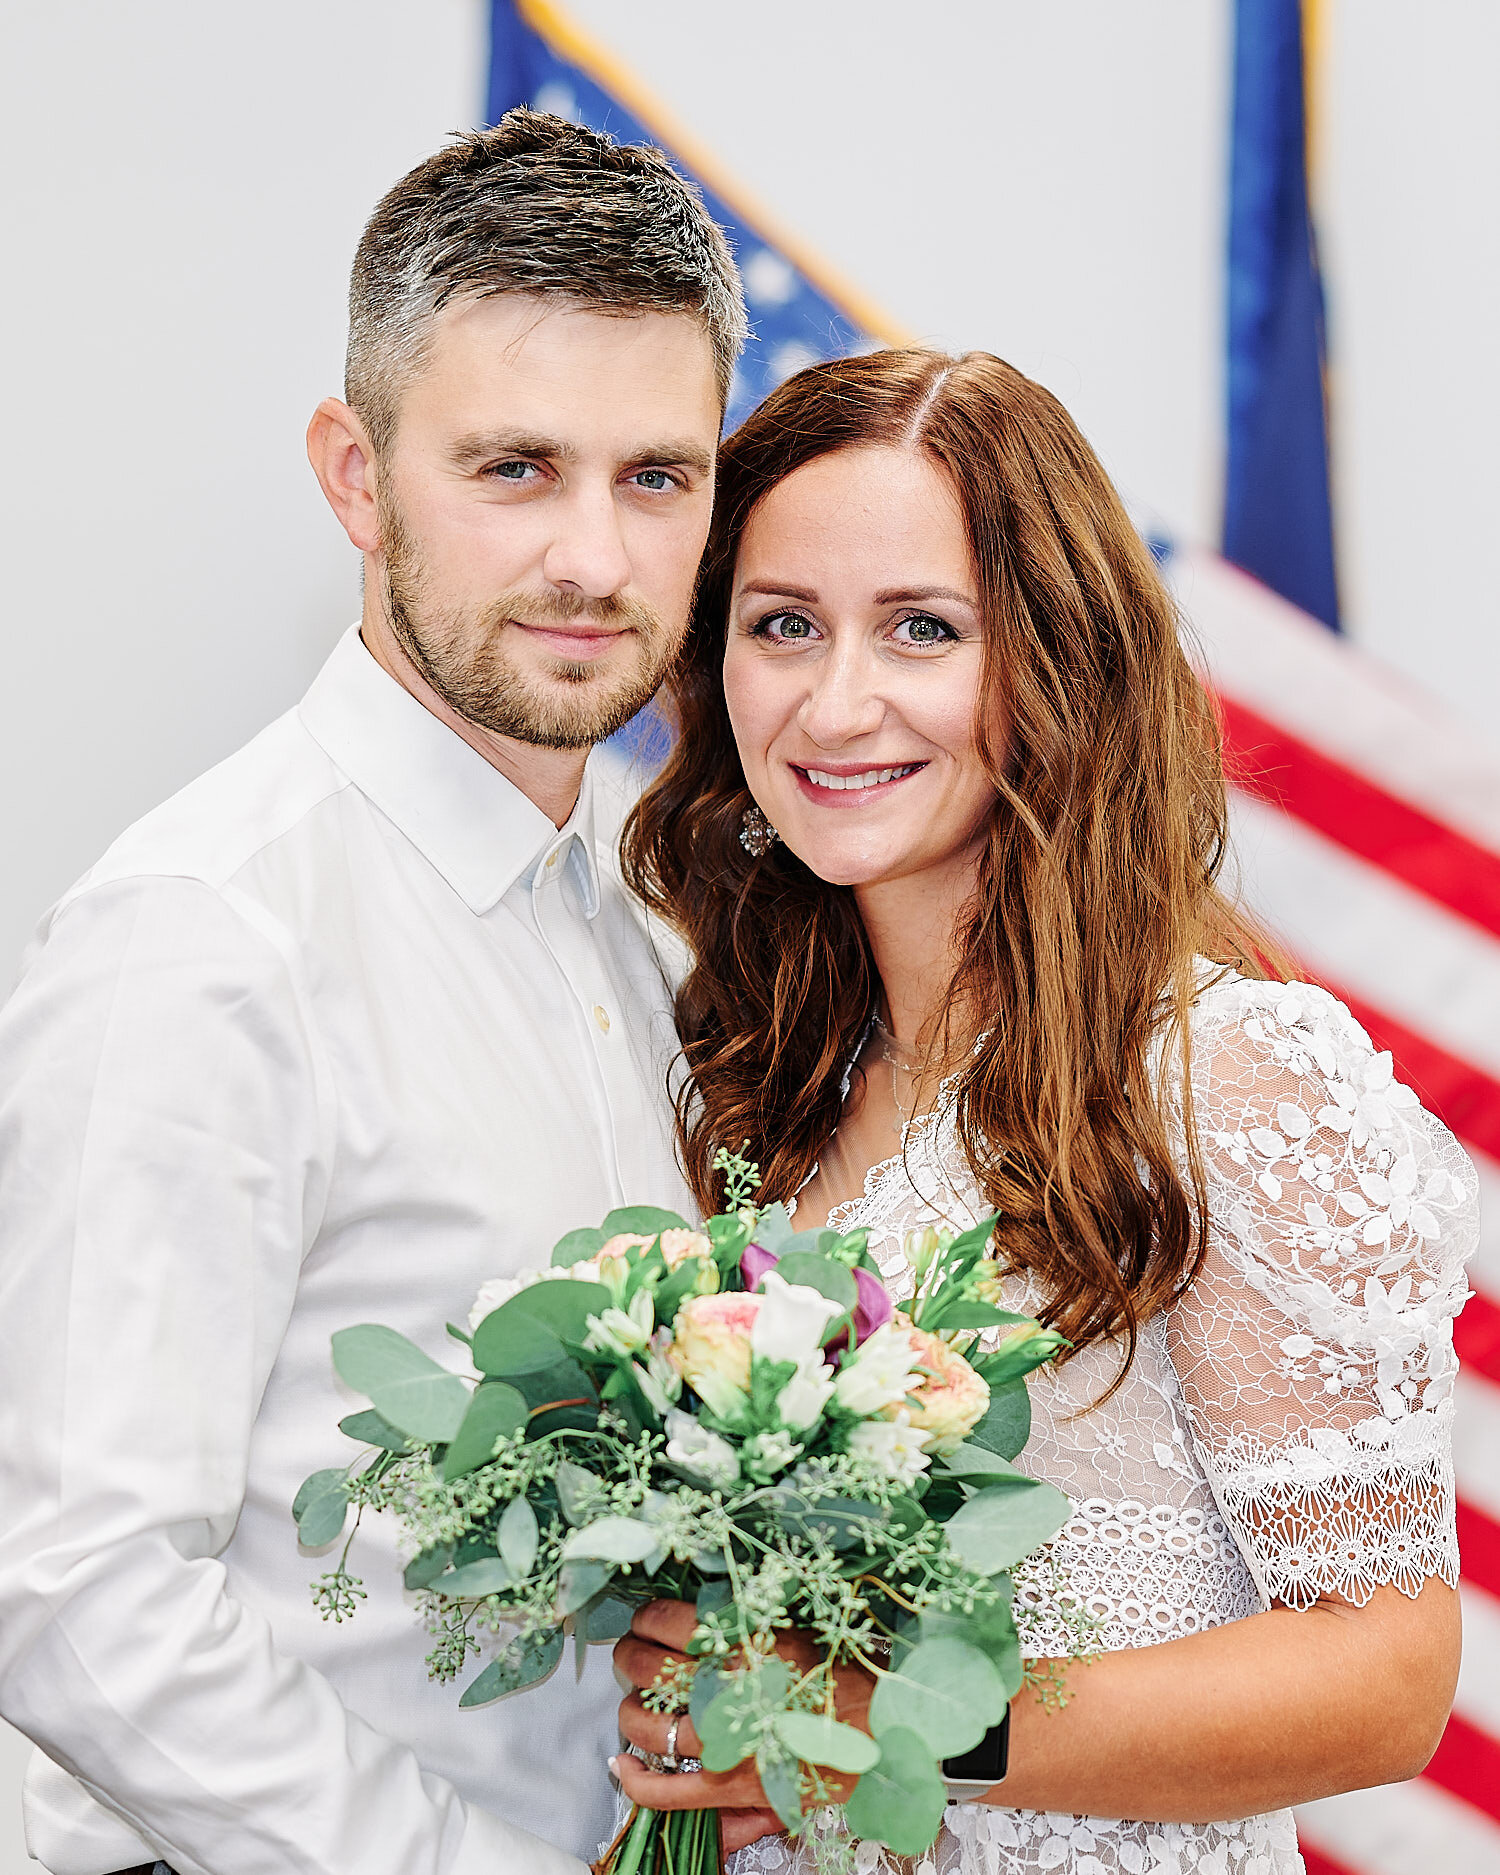  Olga Shuleika and Dzmitry Hryher are tying the knot on a hot summer day in a private ceremony in Pittsburgh city magistrate. The girl looks beautiful in small white lace dress and she is pregnant. 